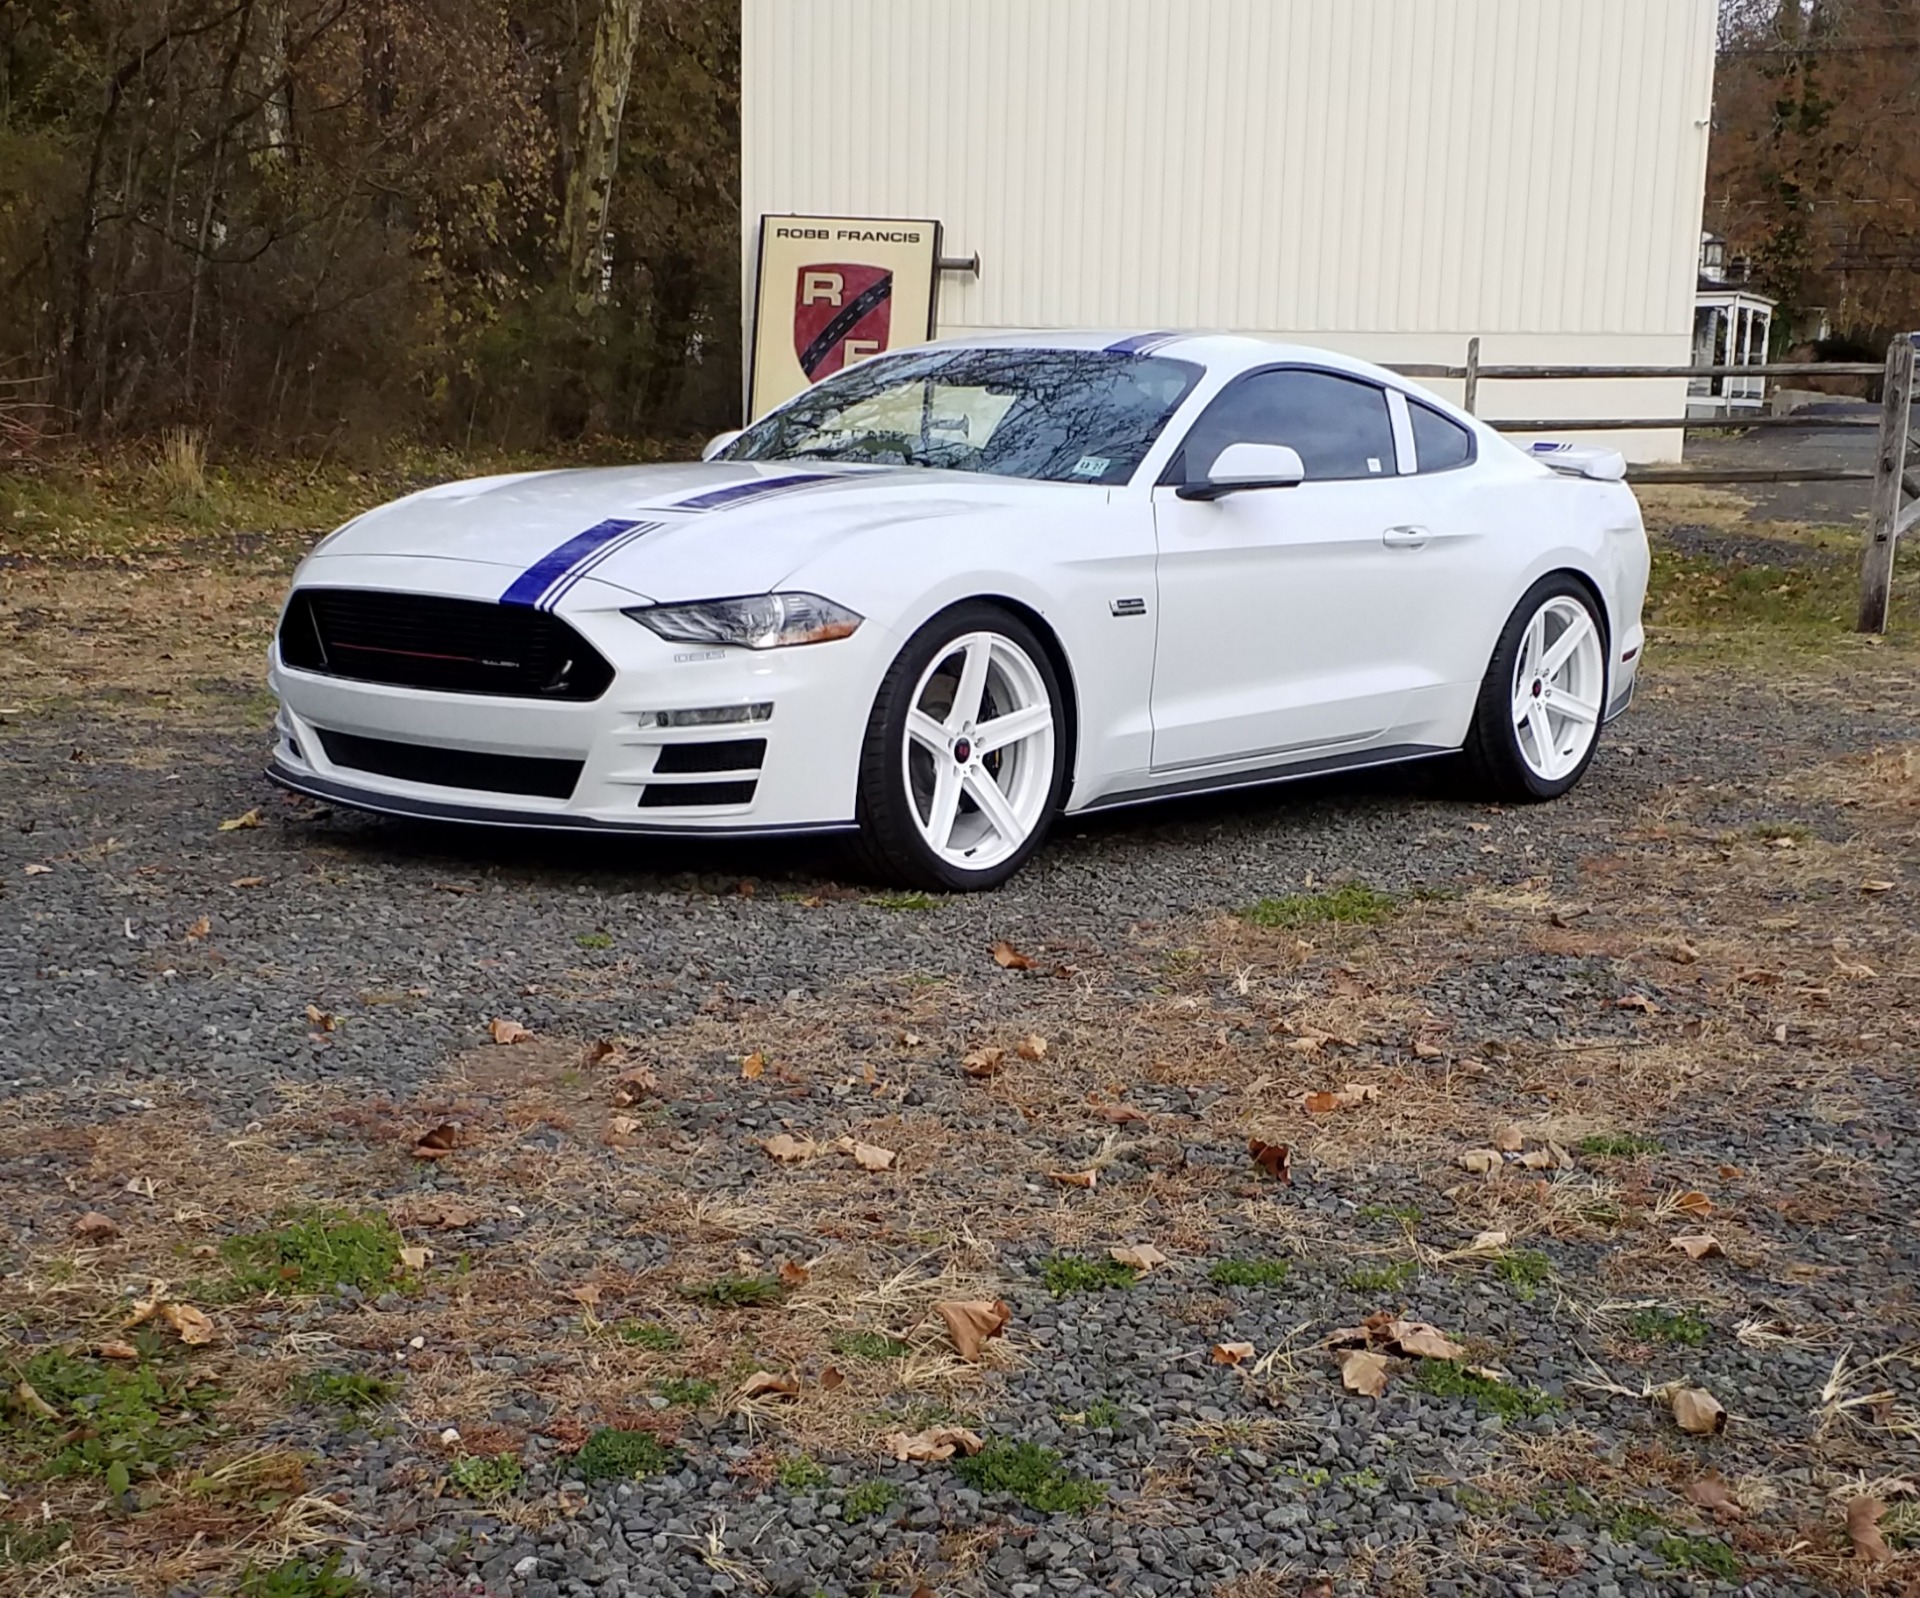 Used 2022 Ford / SALEEN Mustang 302 / Heritage Edition - White Label  | Peapack, NJ